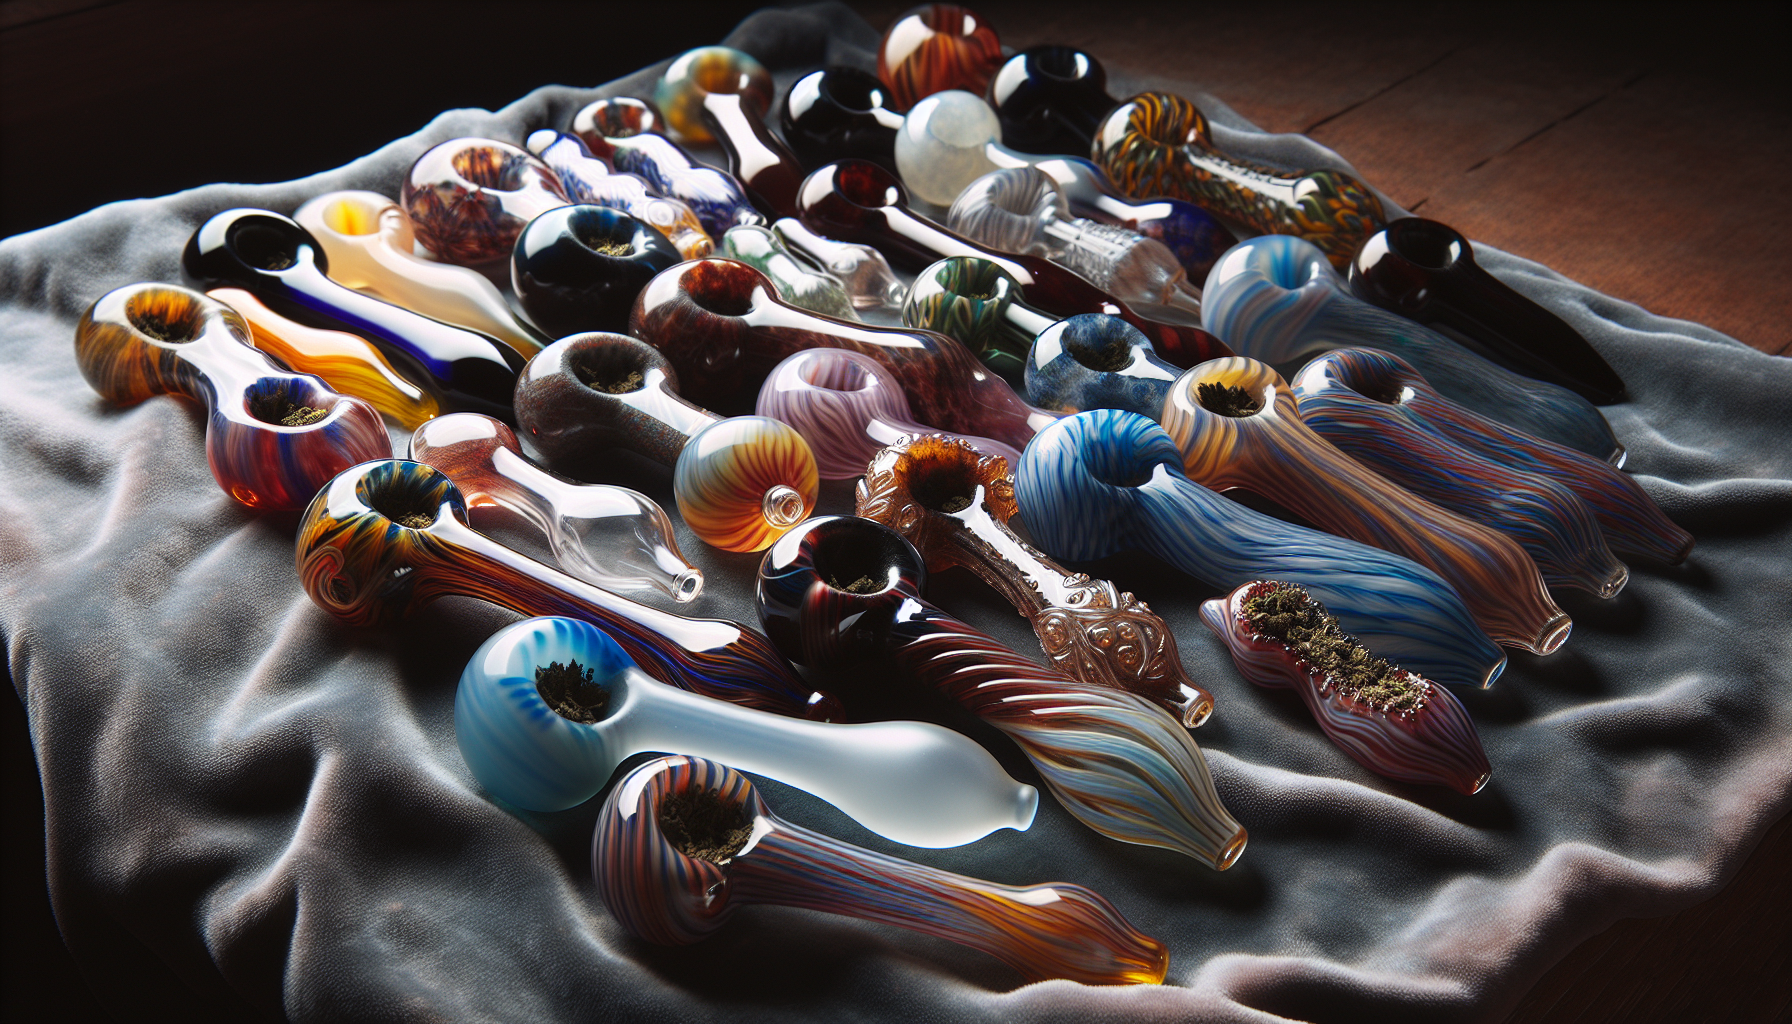 Spoon pipes for smoking pleasure